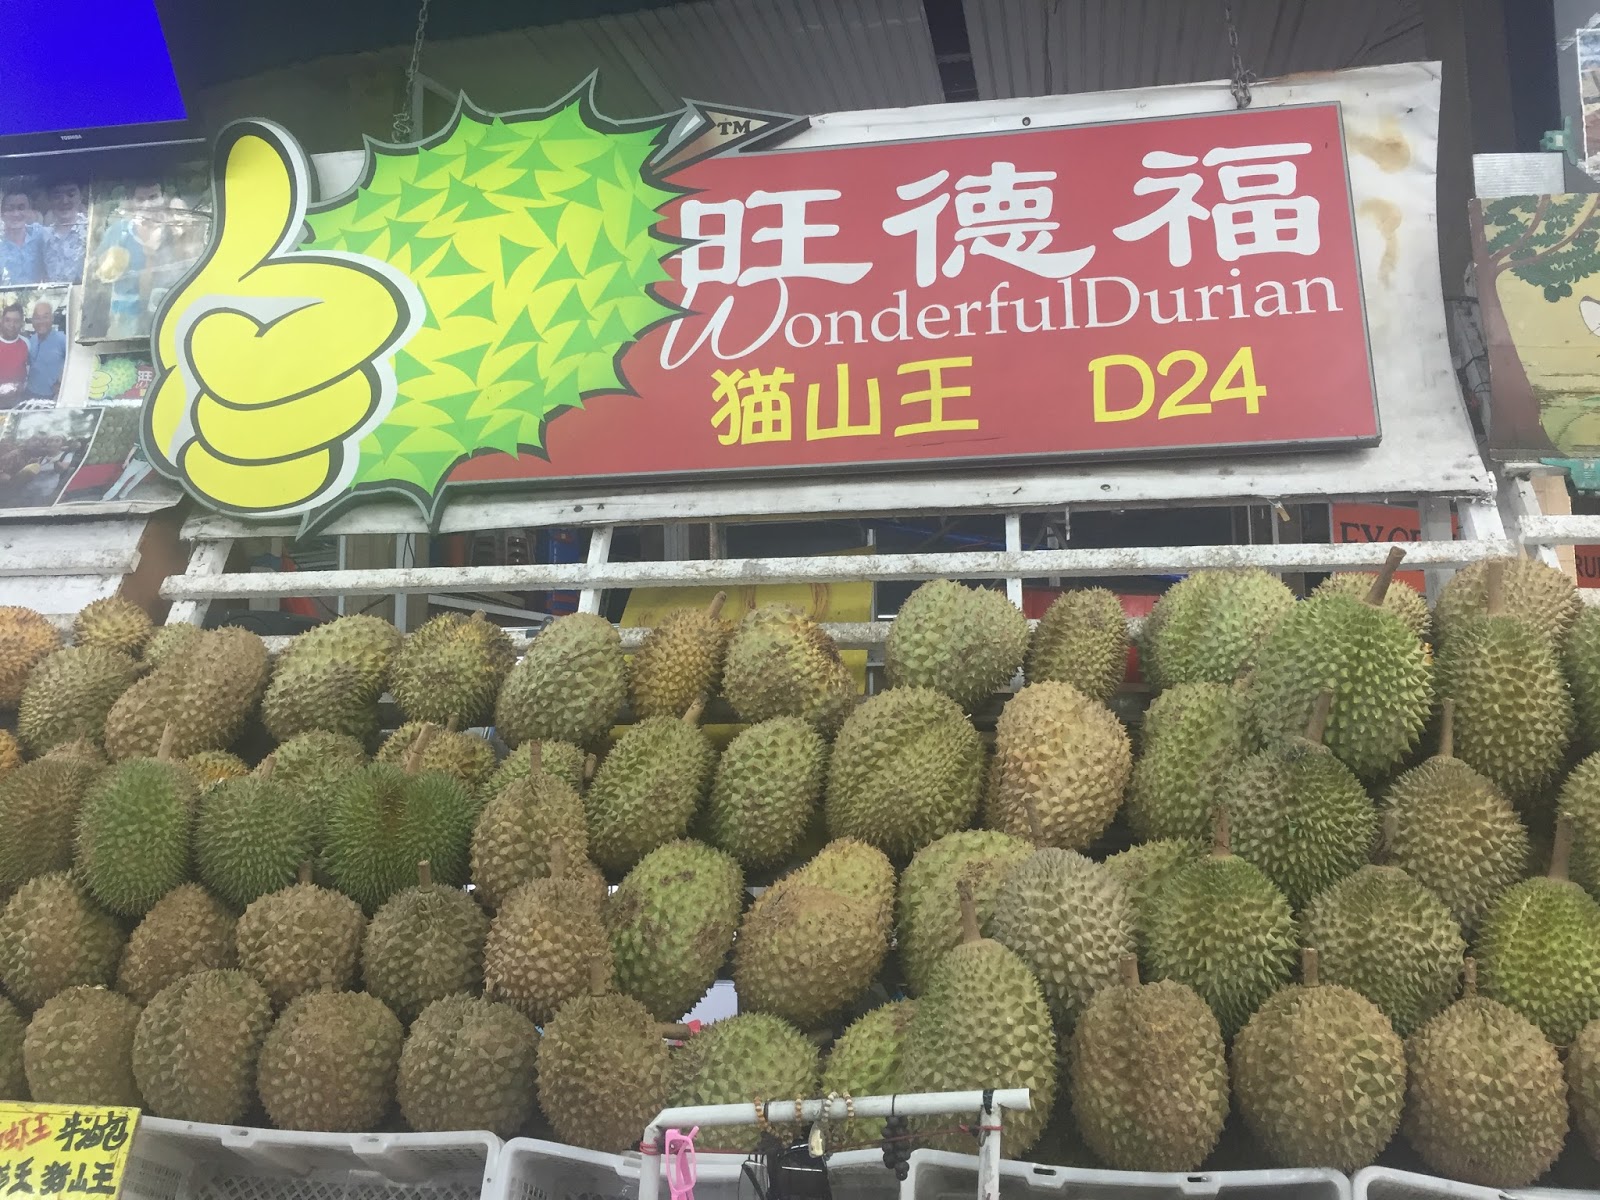 Wonderful Durian - Durian Delivery Singapore